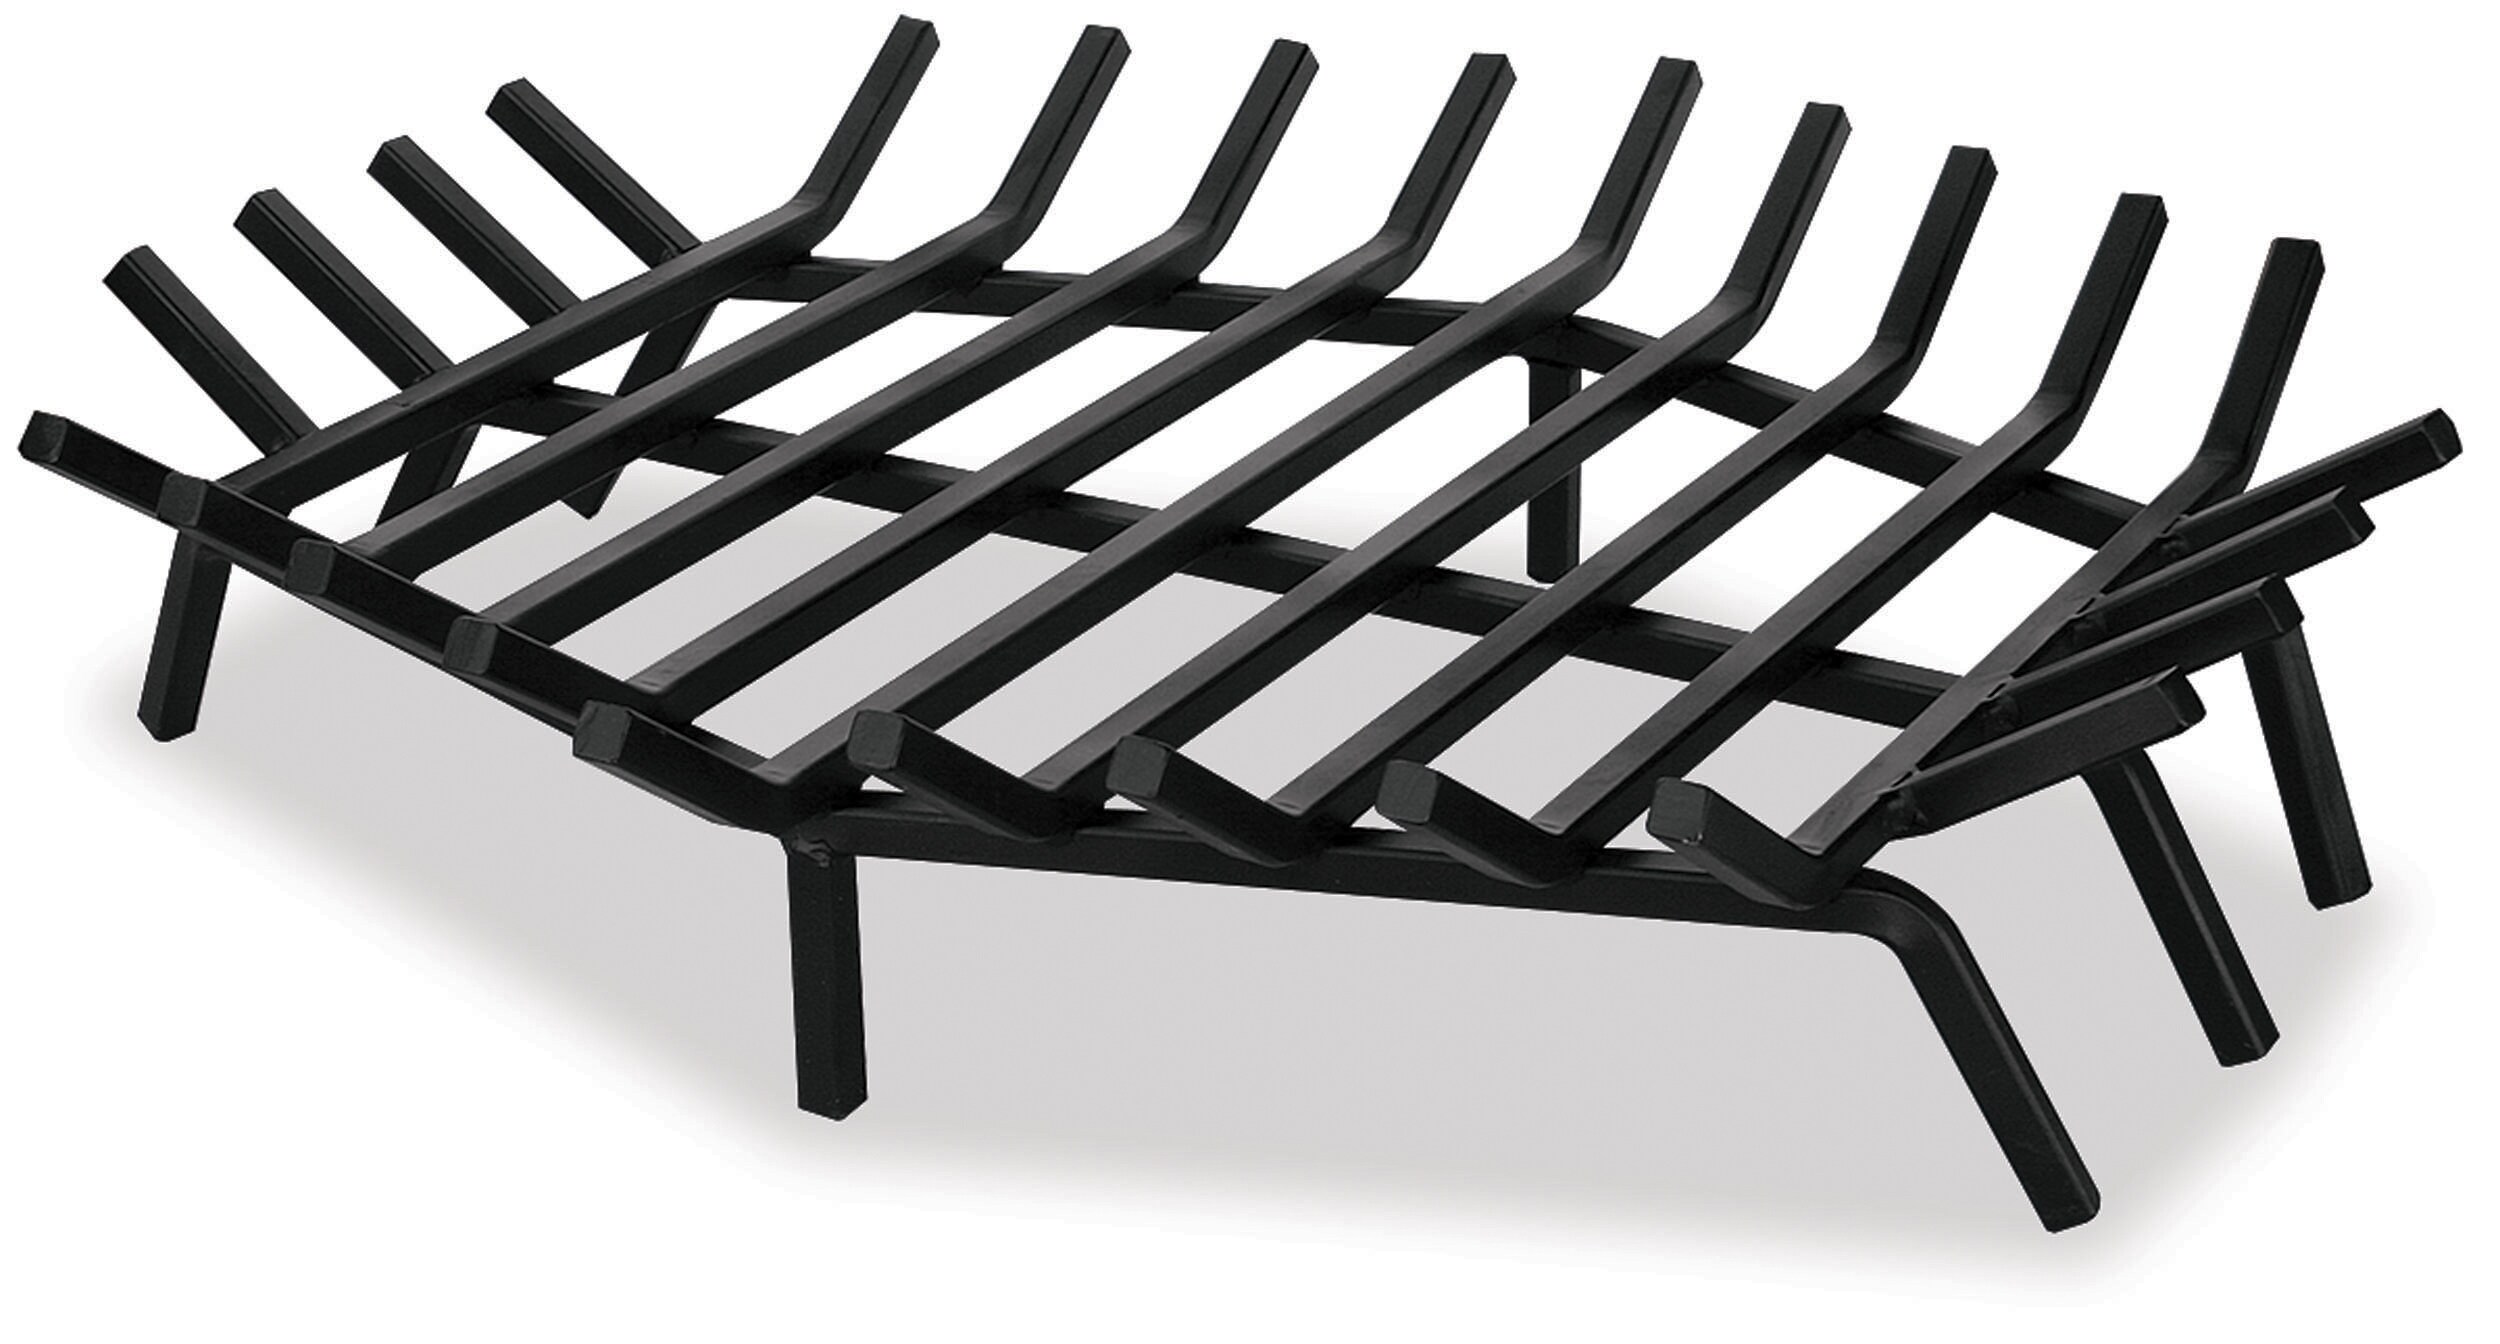 Large Wrought Iron Fireplace Log Grate Firewood For Outdoor